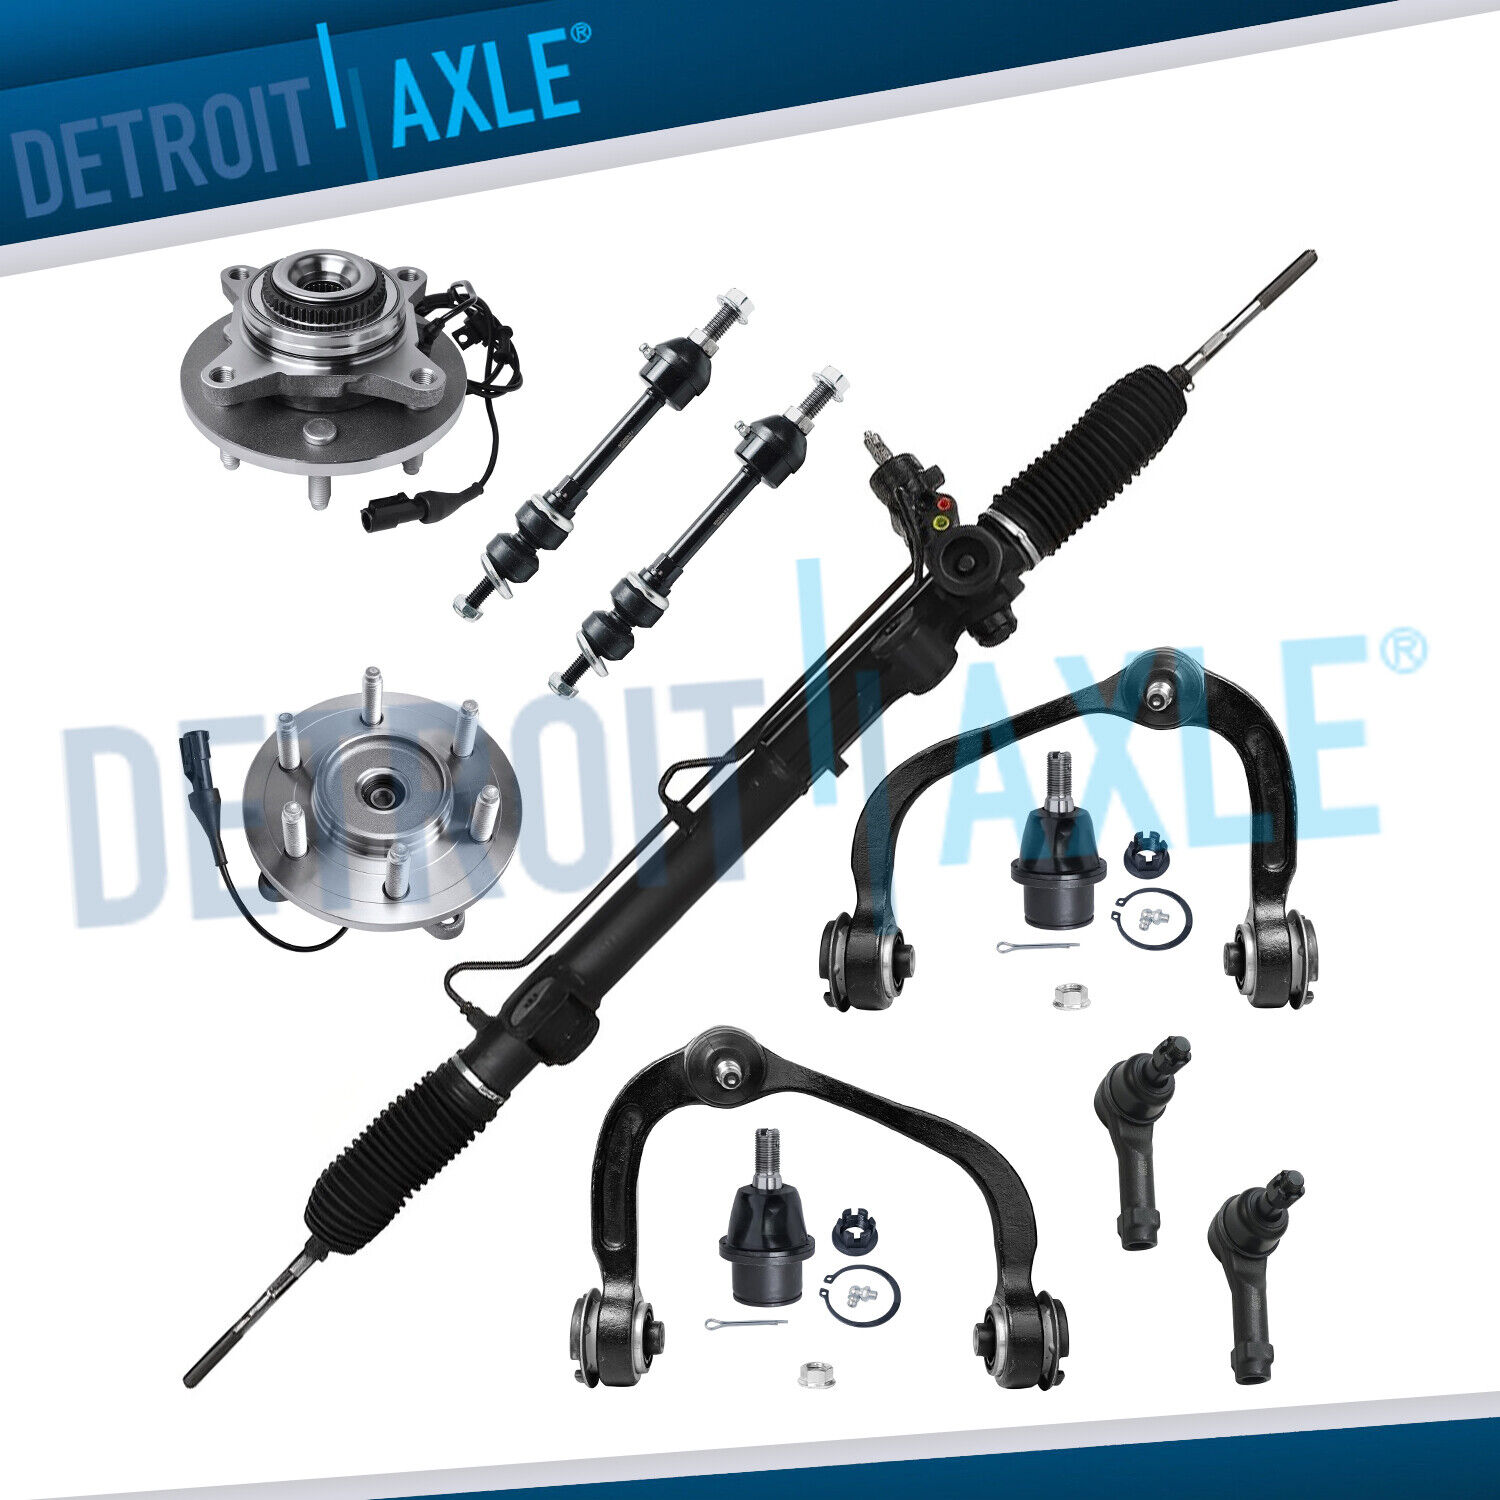 11pc Complete Rack and Pinion Assembly Suspension Kit 2004-2008 Ford F-150 - 4x4